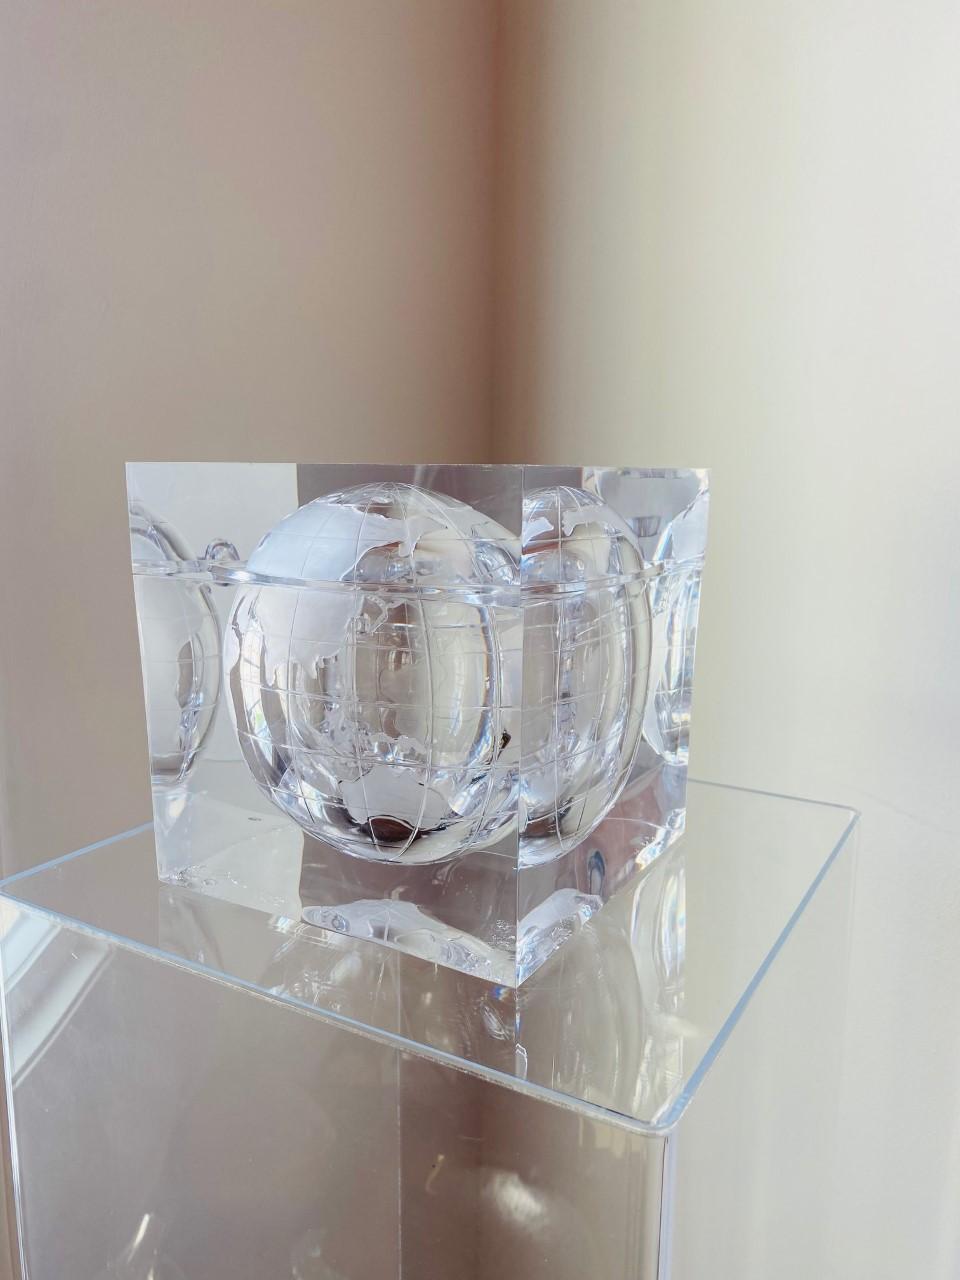 Beautiful lucite ice bucket cube depicting the world captured in a sculpture that resembles an ice cube. The effect displays a frosted world map of continents and orbiting moon. This piece was designed and created by Alessandro Albrizzi, Italy